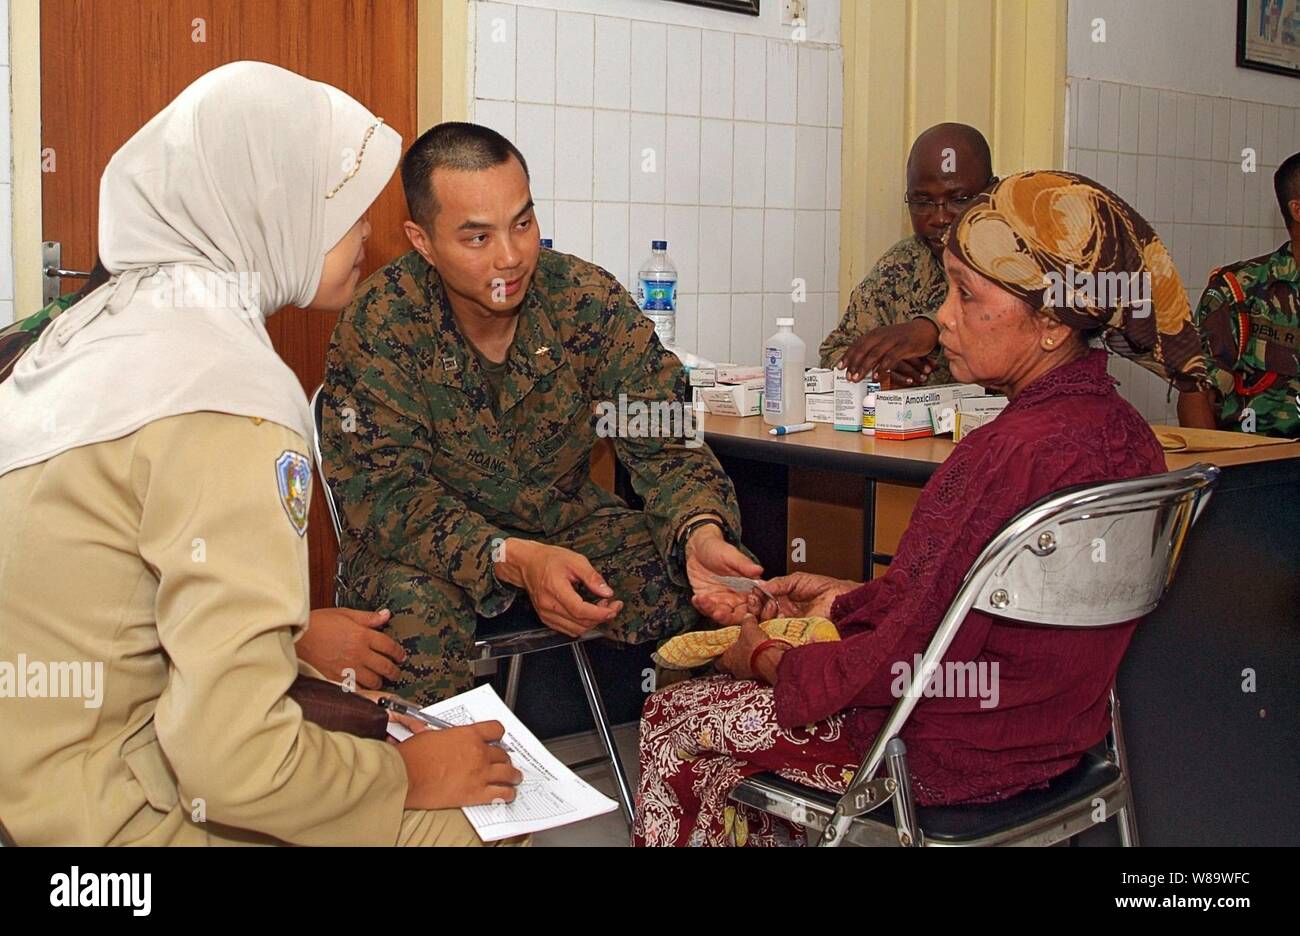 U.S. Navy Lt. Thomas Hoang (2nd from left) speaks with a patient during a medical and dental civic action project in Puskesmas Jangkar, Indonesia, on March 12, 2008.  U.S. Marines and sailors from the 31st Marine Expeditionary Unit and members of the Indonesian armed forces are conducting the project to increase humanitarian assistance and disaster relief response capabilities, improve interoperability and continue professional relationships between the two militaries. Stock Photo